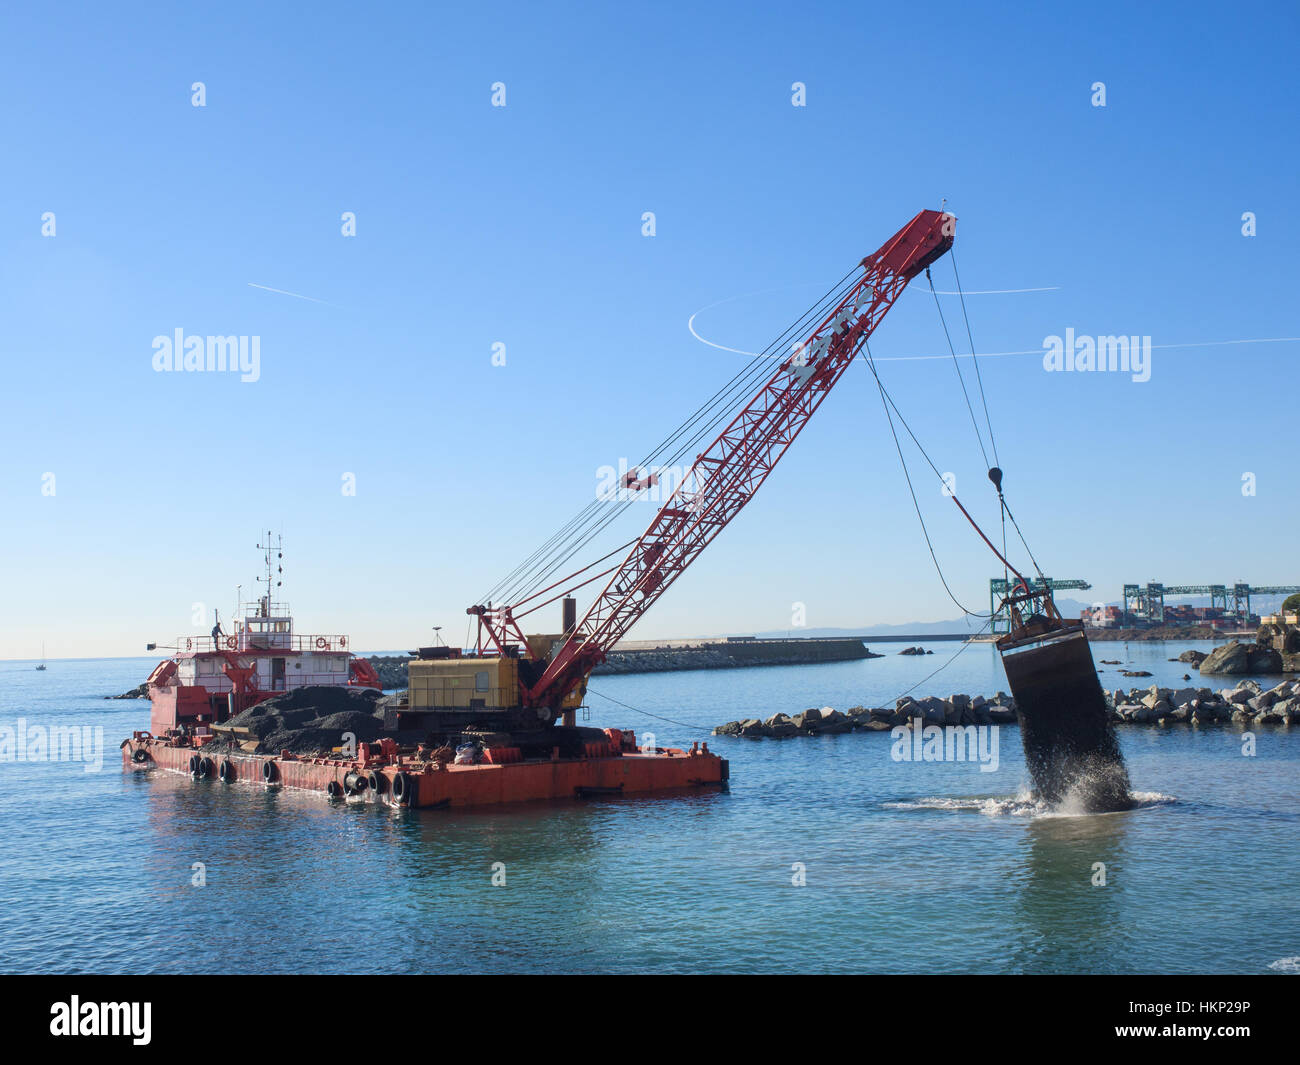 Genoa, Italy   December 22, 2016: Grab Dredge with  Clamshell Bucket unloading gravel in the water of a port next to the shore to replenish a beach Stock Photo